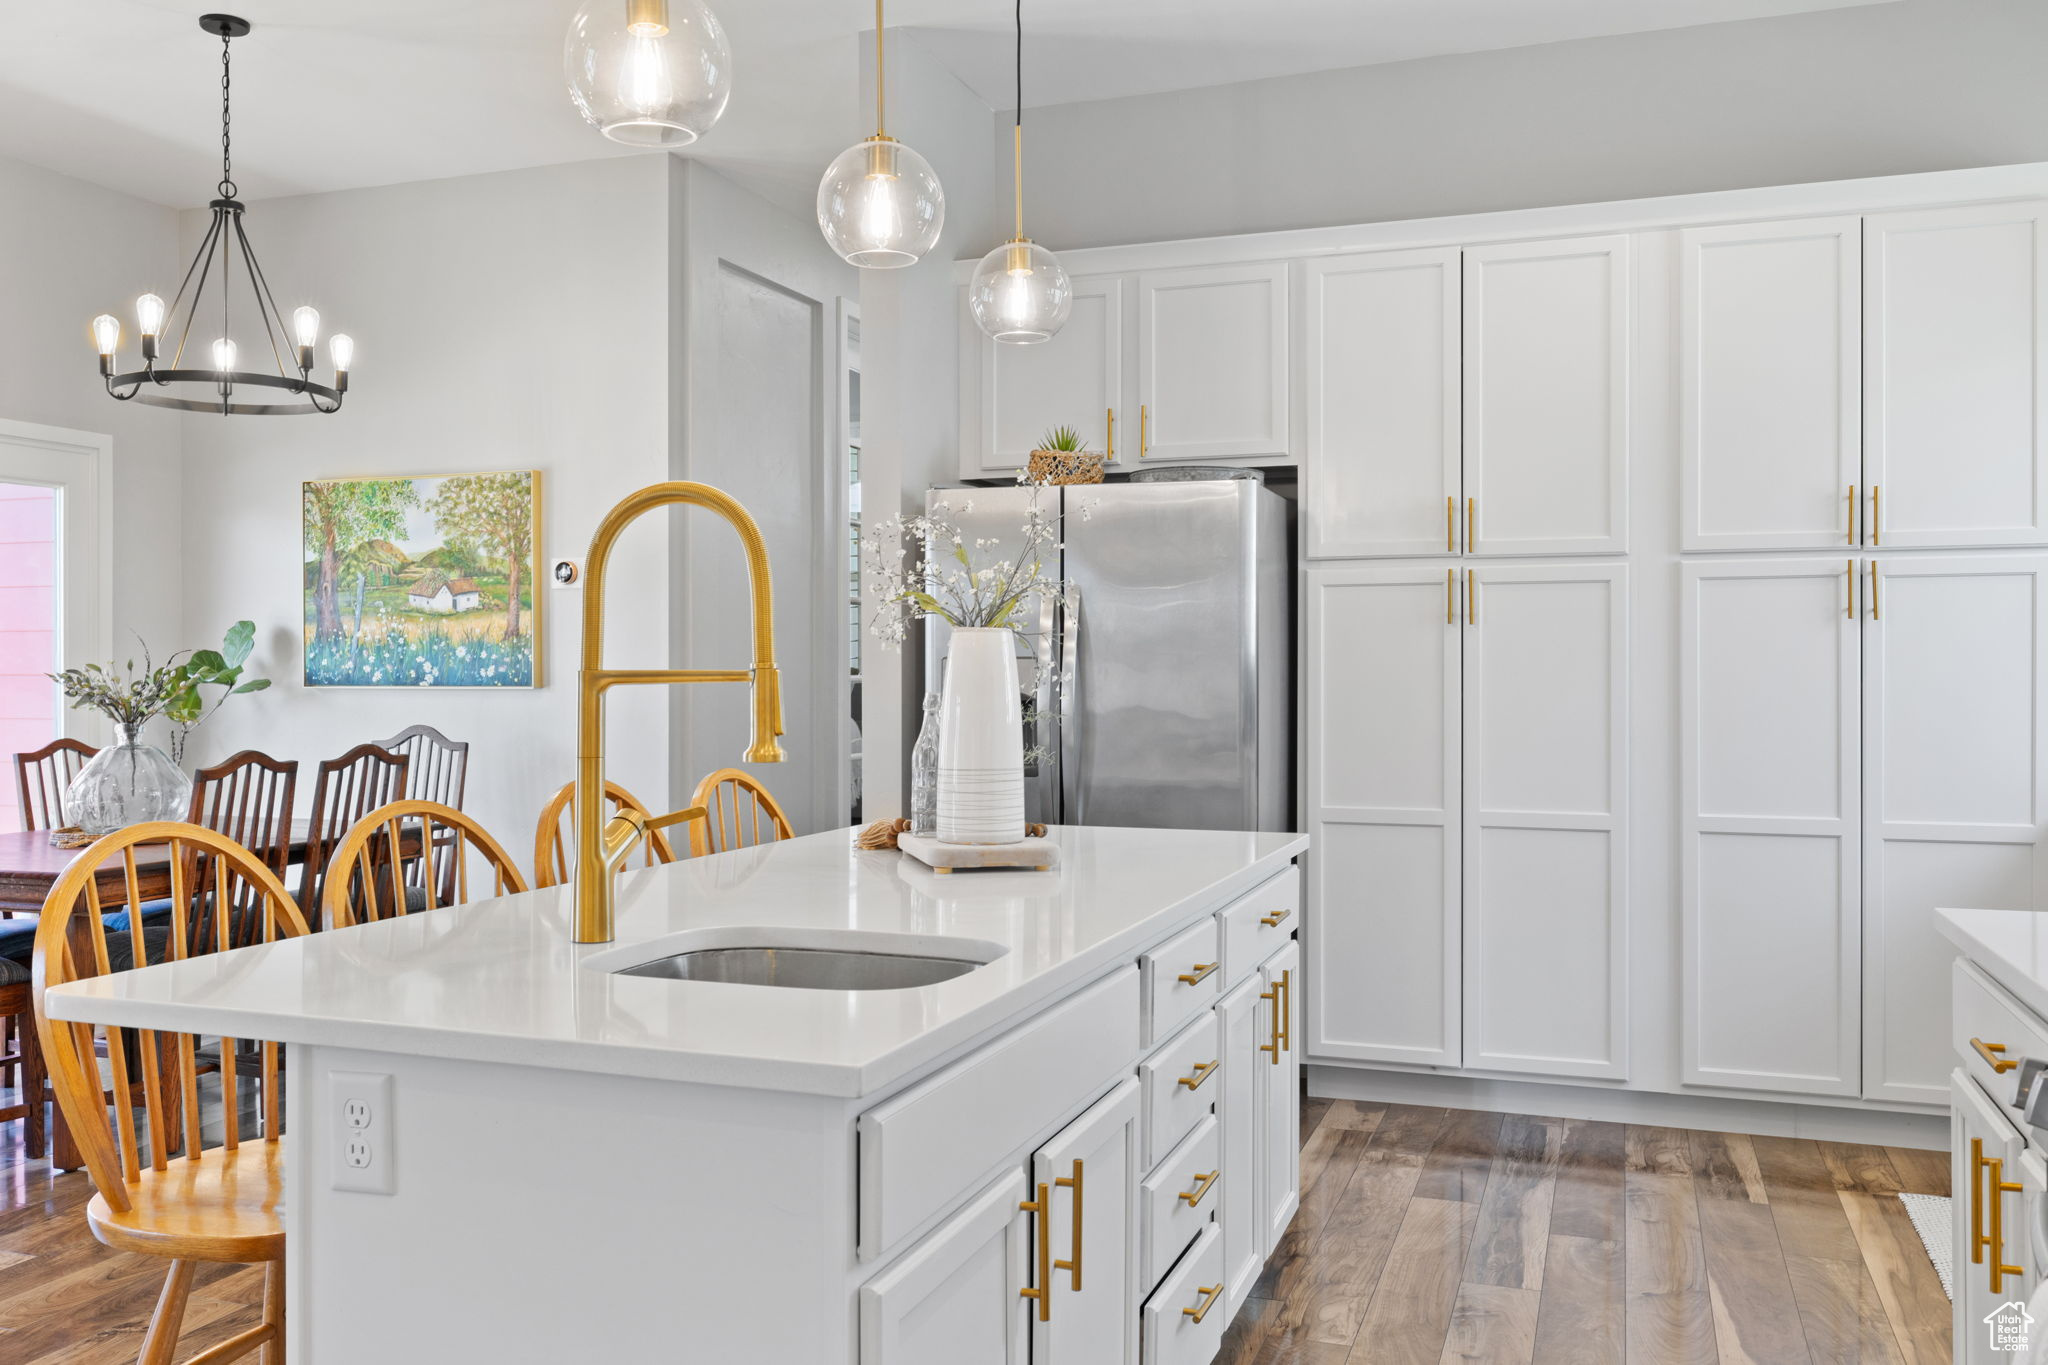 Kitchen featuring stainless steel refrigerator, white cabinetry, hardwood / wood-style floors, decorative light fixtures, and a center island with sink